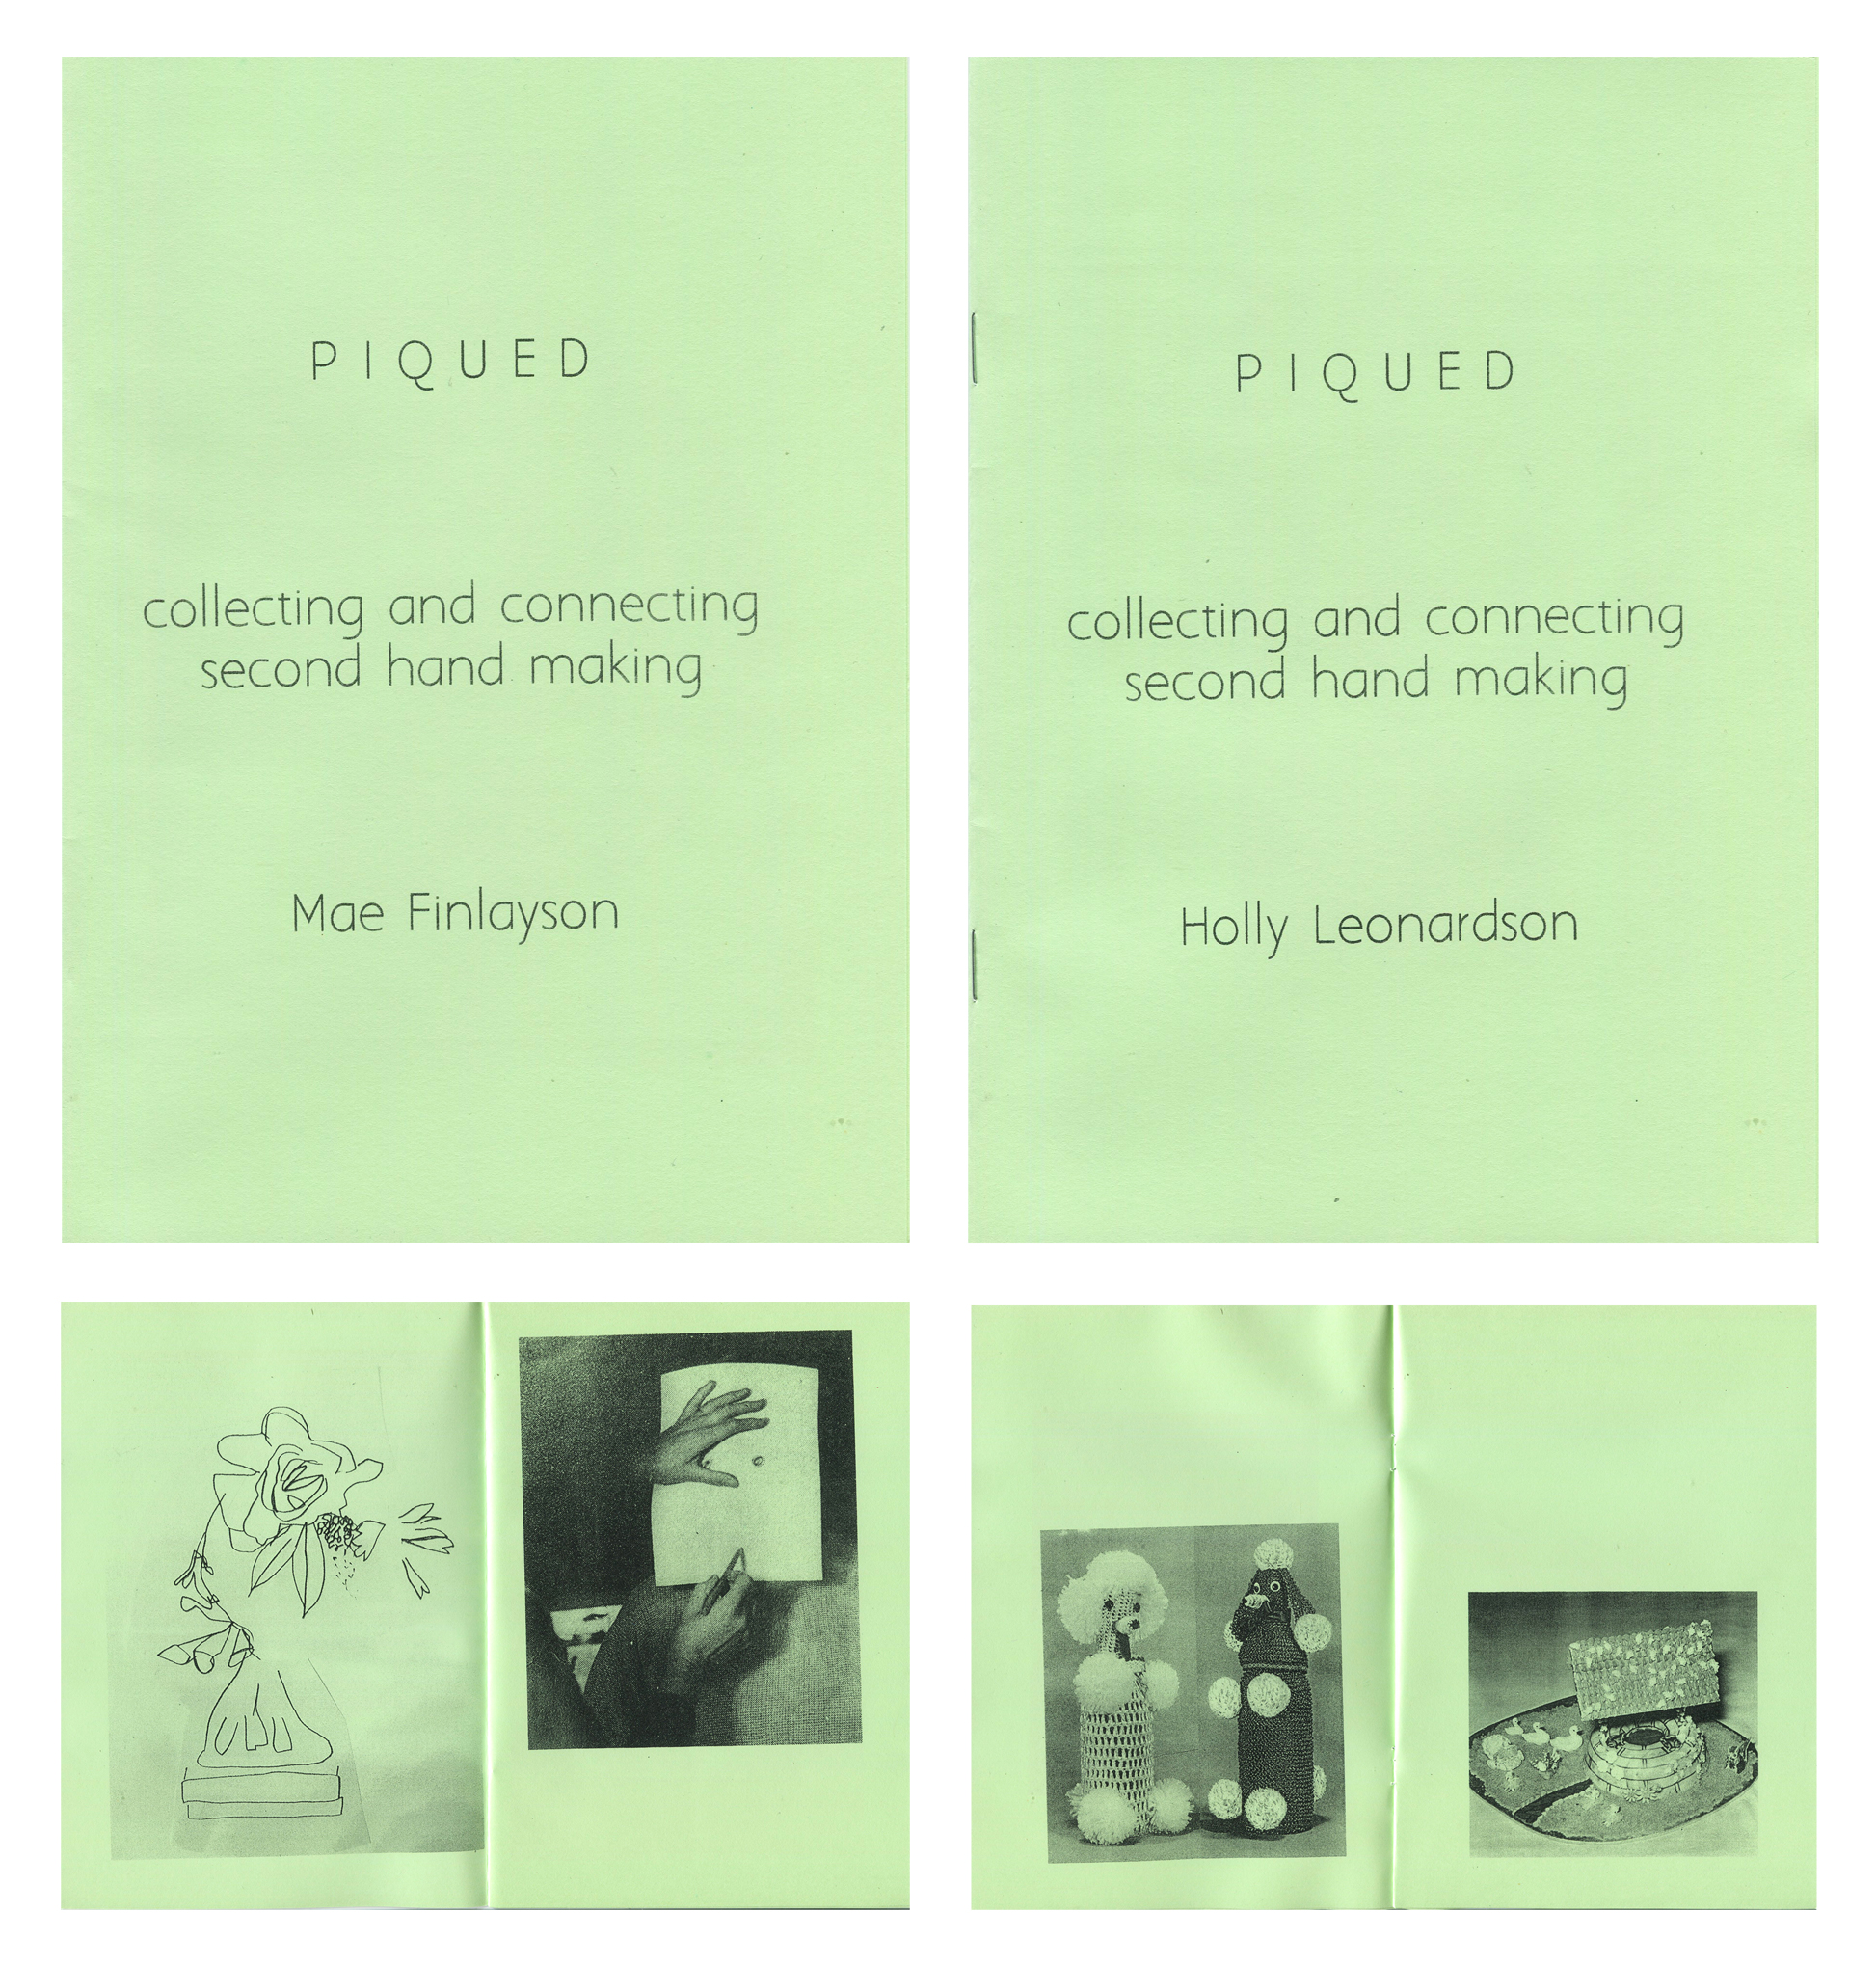 Piqued: Collecting and Connecting Second Hand Making, split zine for the Craft Conference Zine Library curated by Sophia Cai